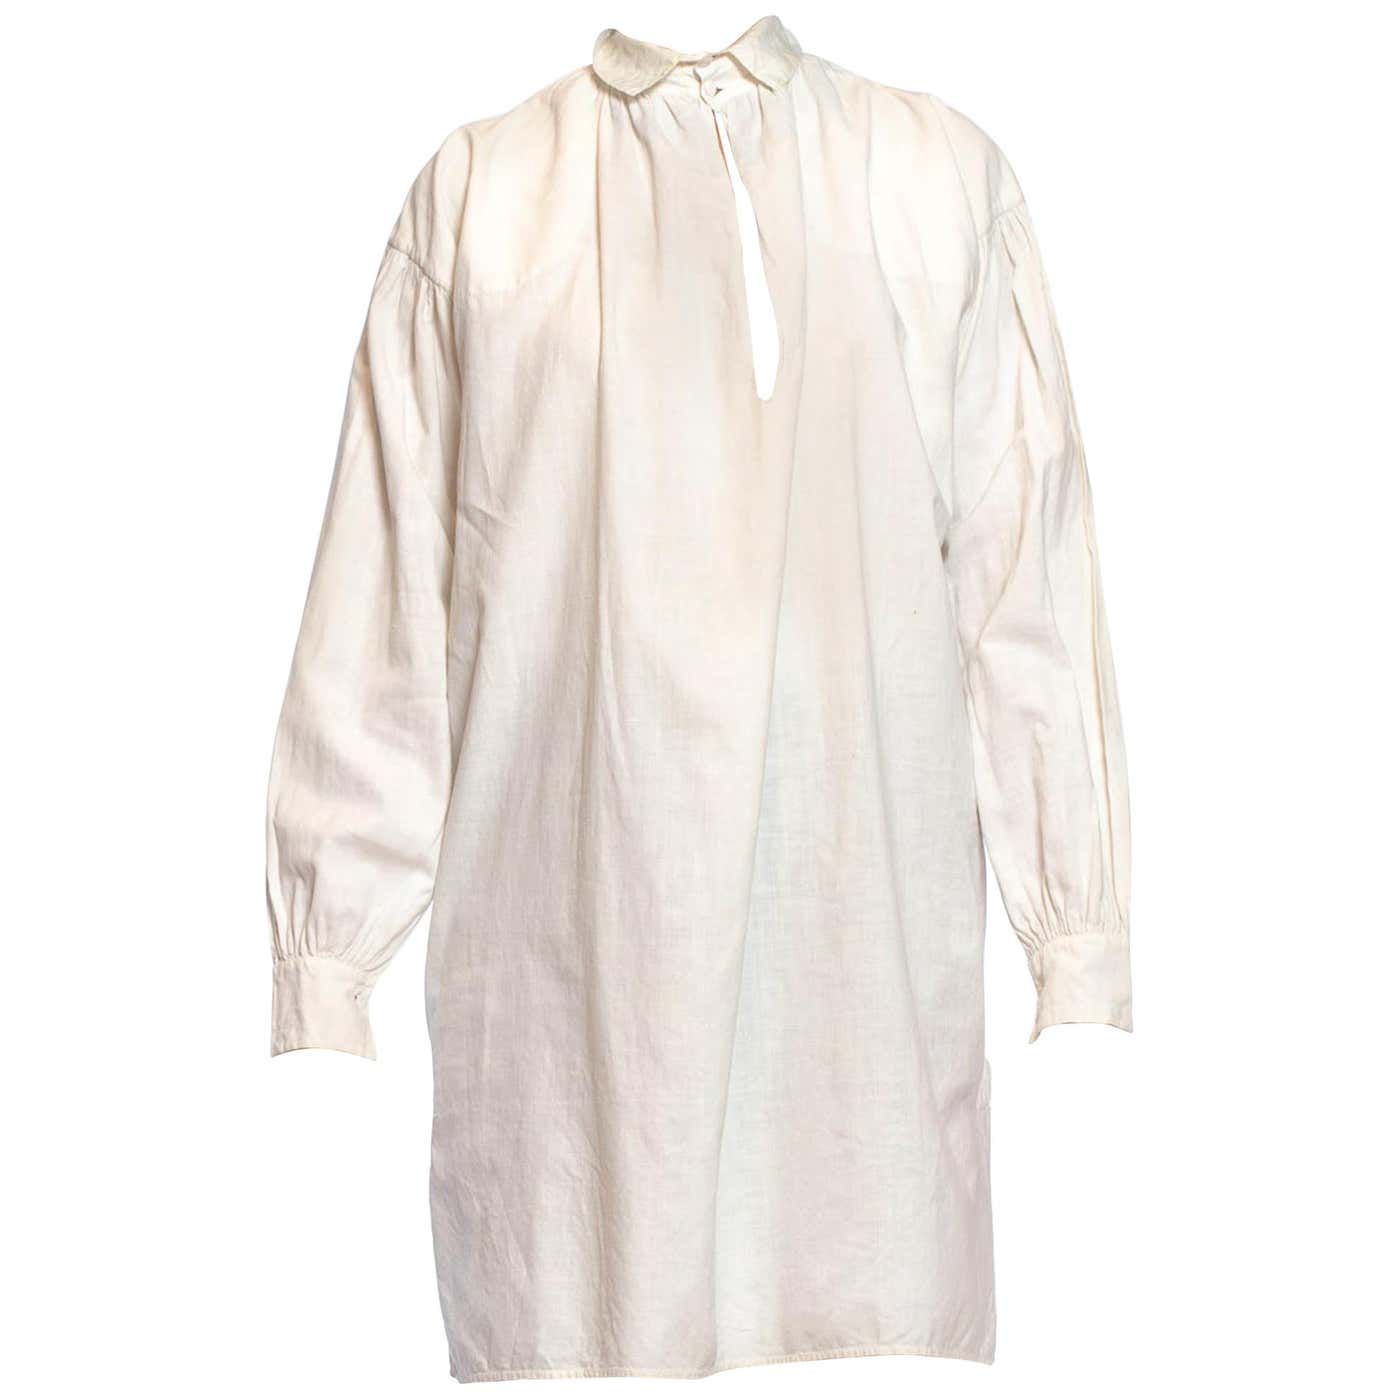 Victorian Ivory Linen and Cotton Men's Shirt From 1810-1830 For Sale at ...